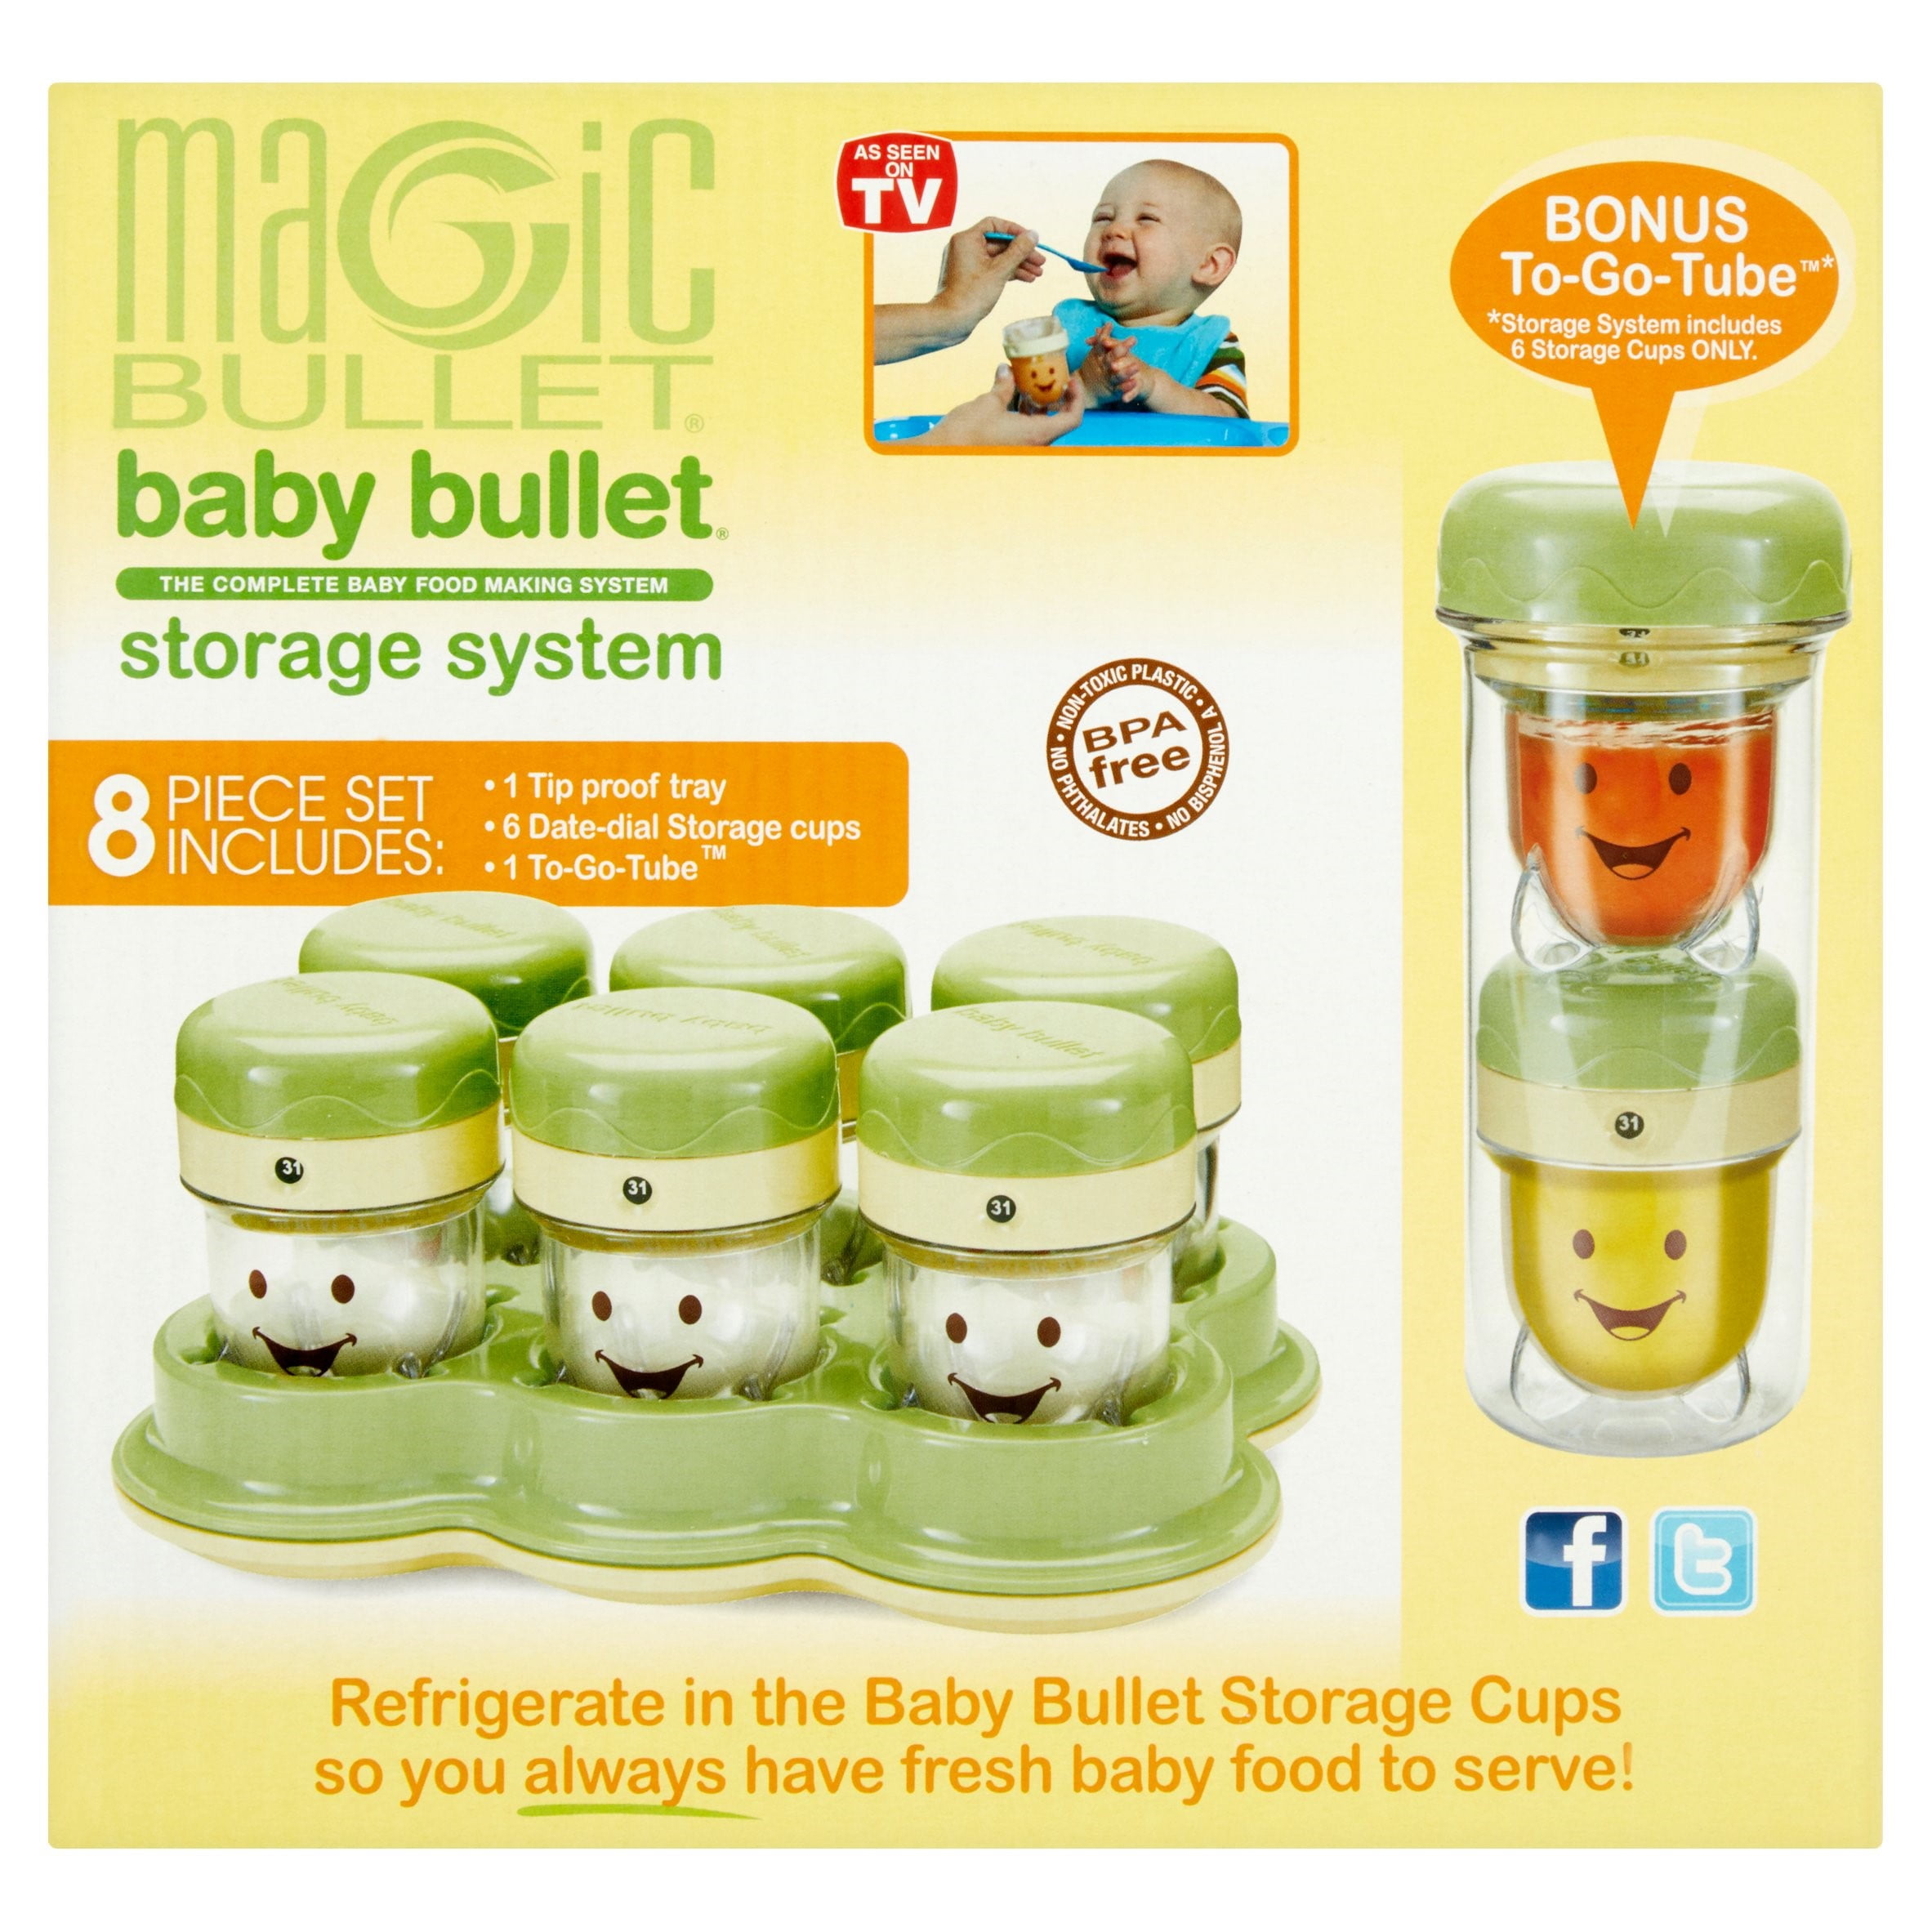 Shop 20 Pieces Baby Bullet feeding Set Online In SA